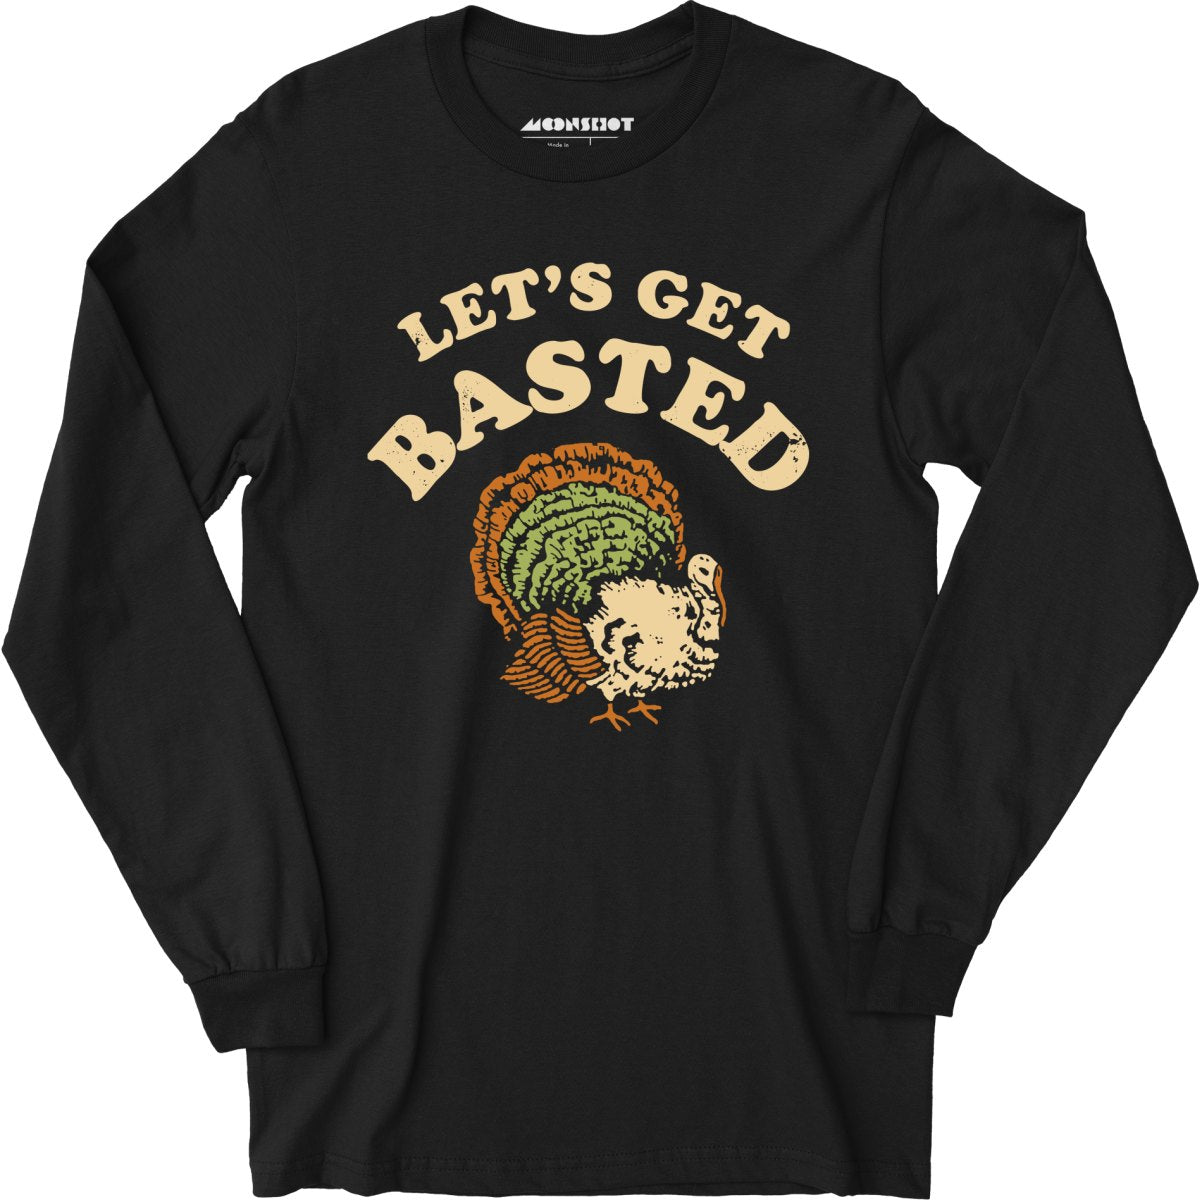 Let's Get Basted - Long Sleeve T-Shirt